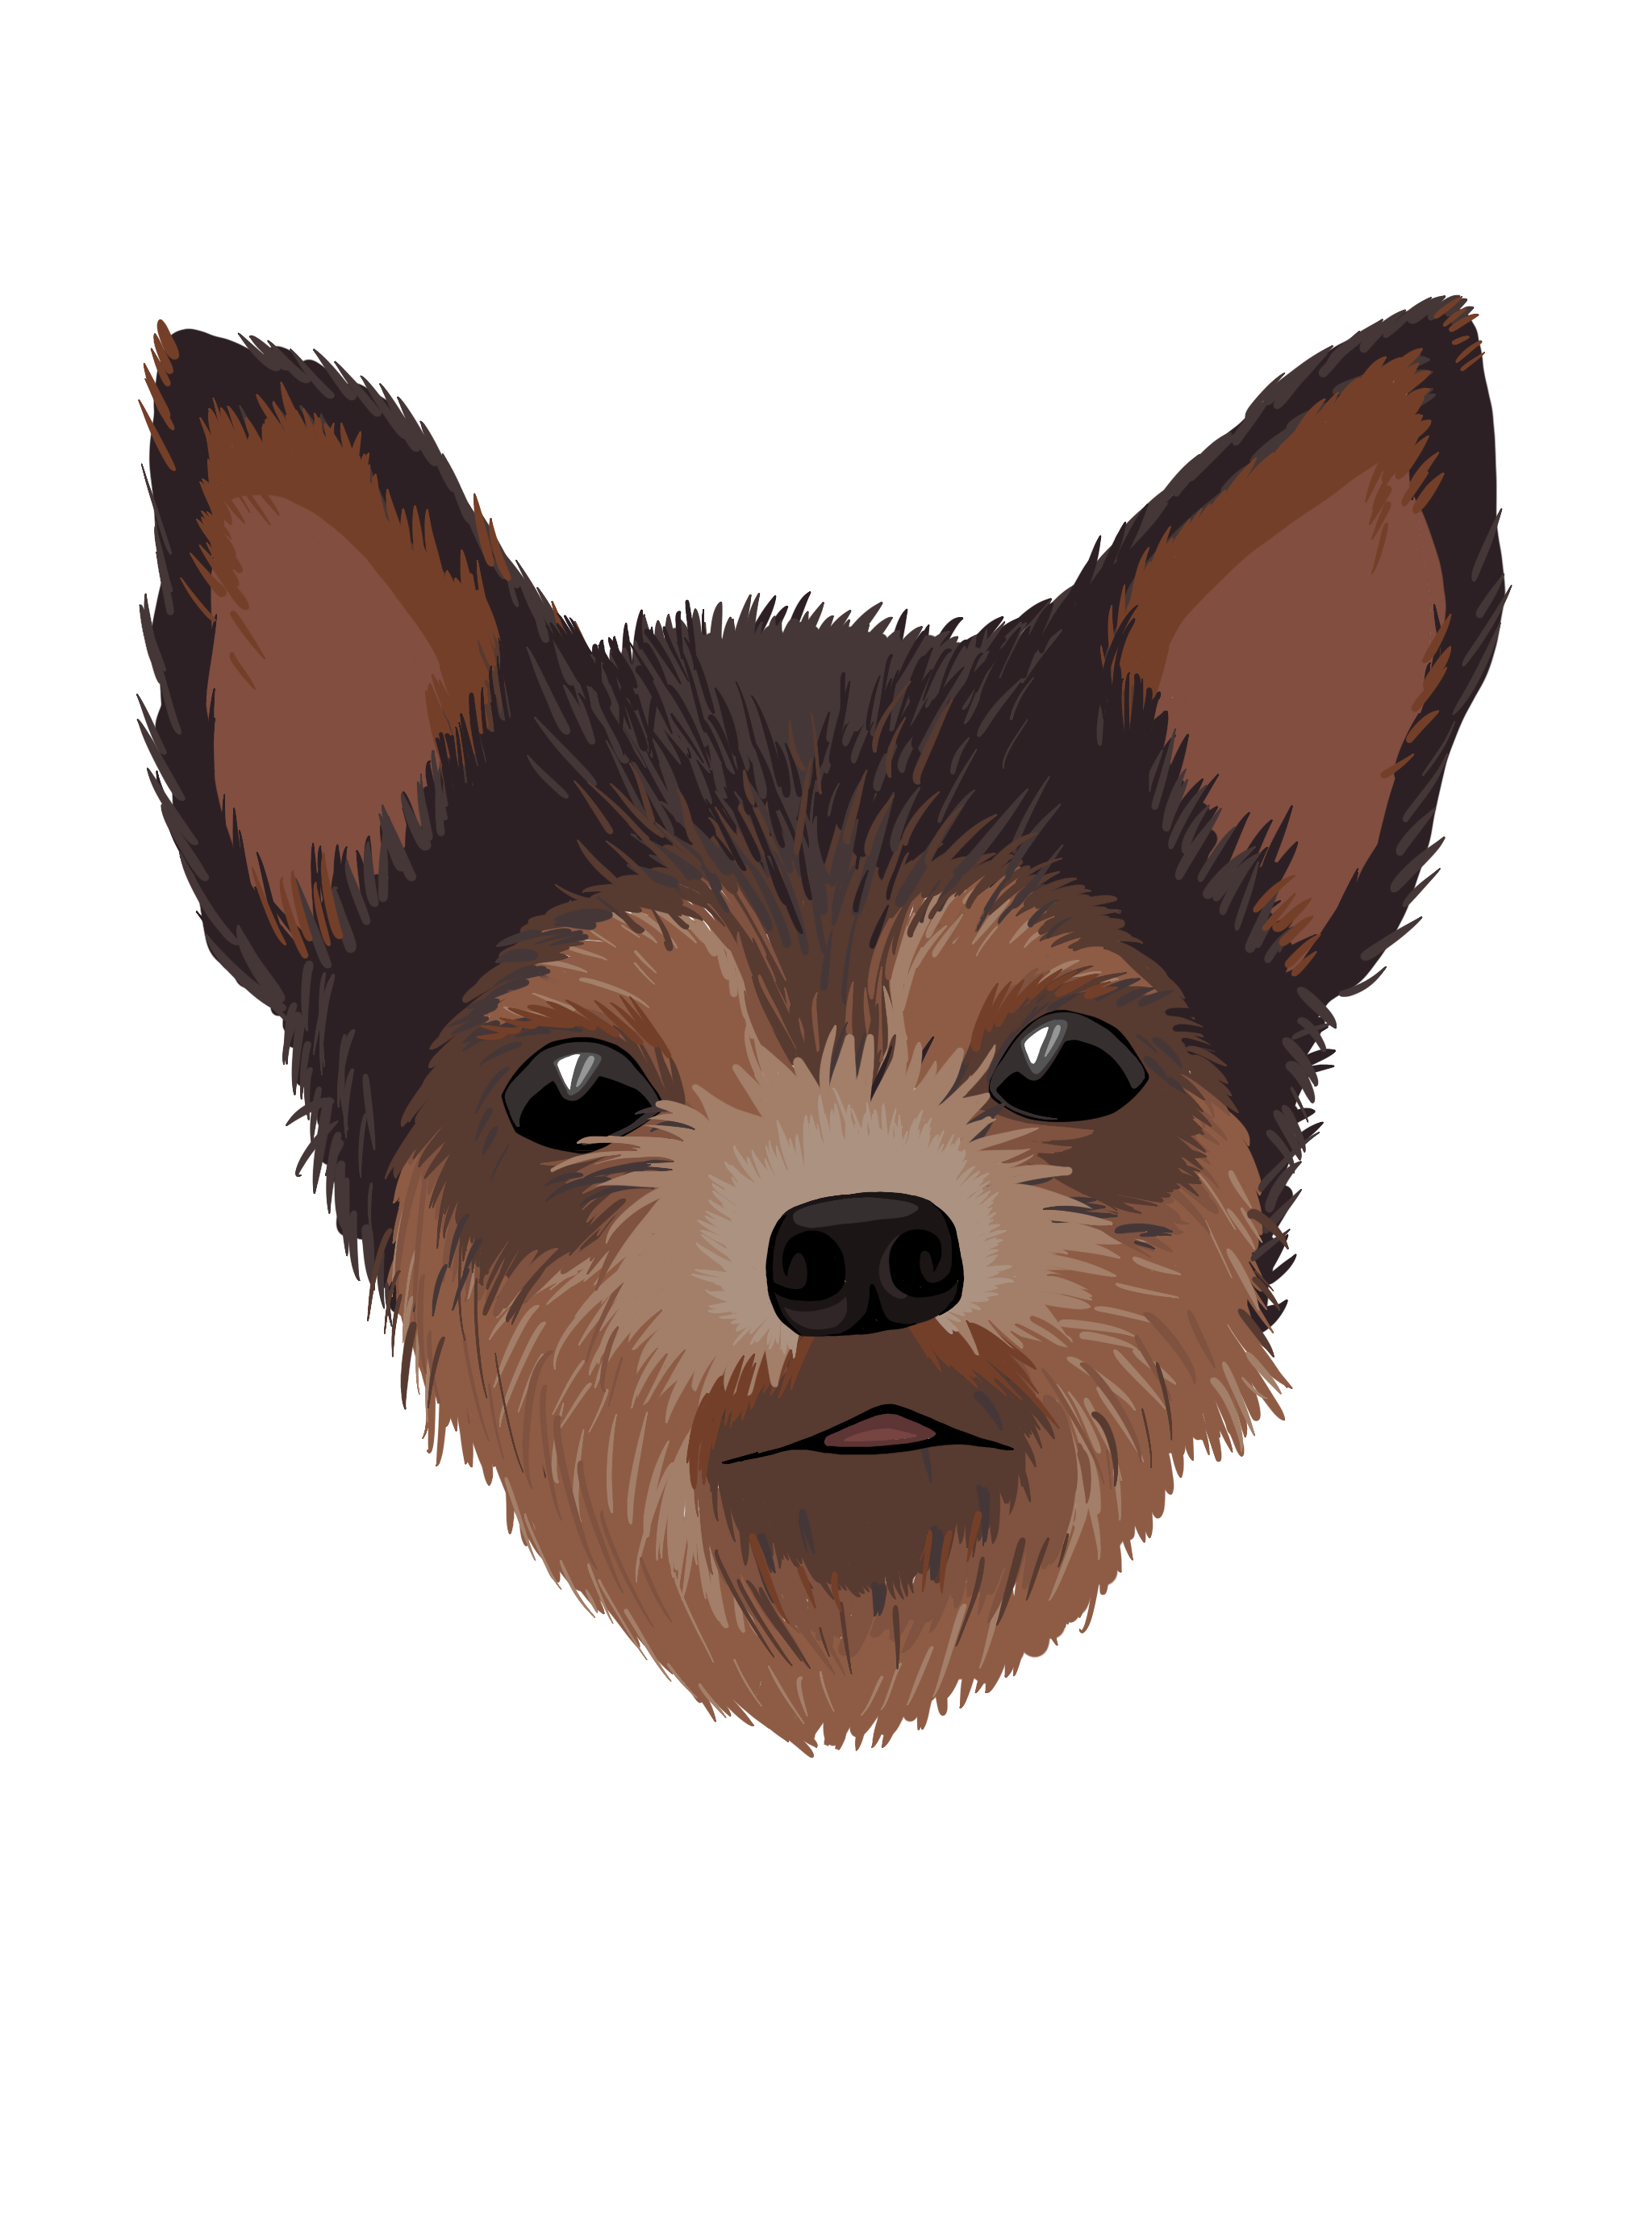 Cartoon style head of a doggie with a small face, black button nose, slight tongue mlem, and perky big ears in various shades of brown. Very cute dog. 